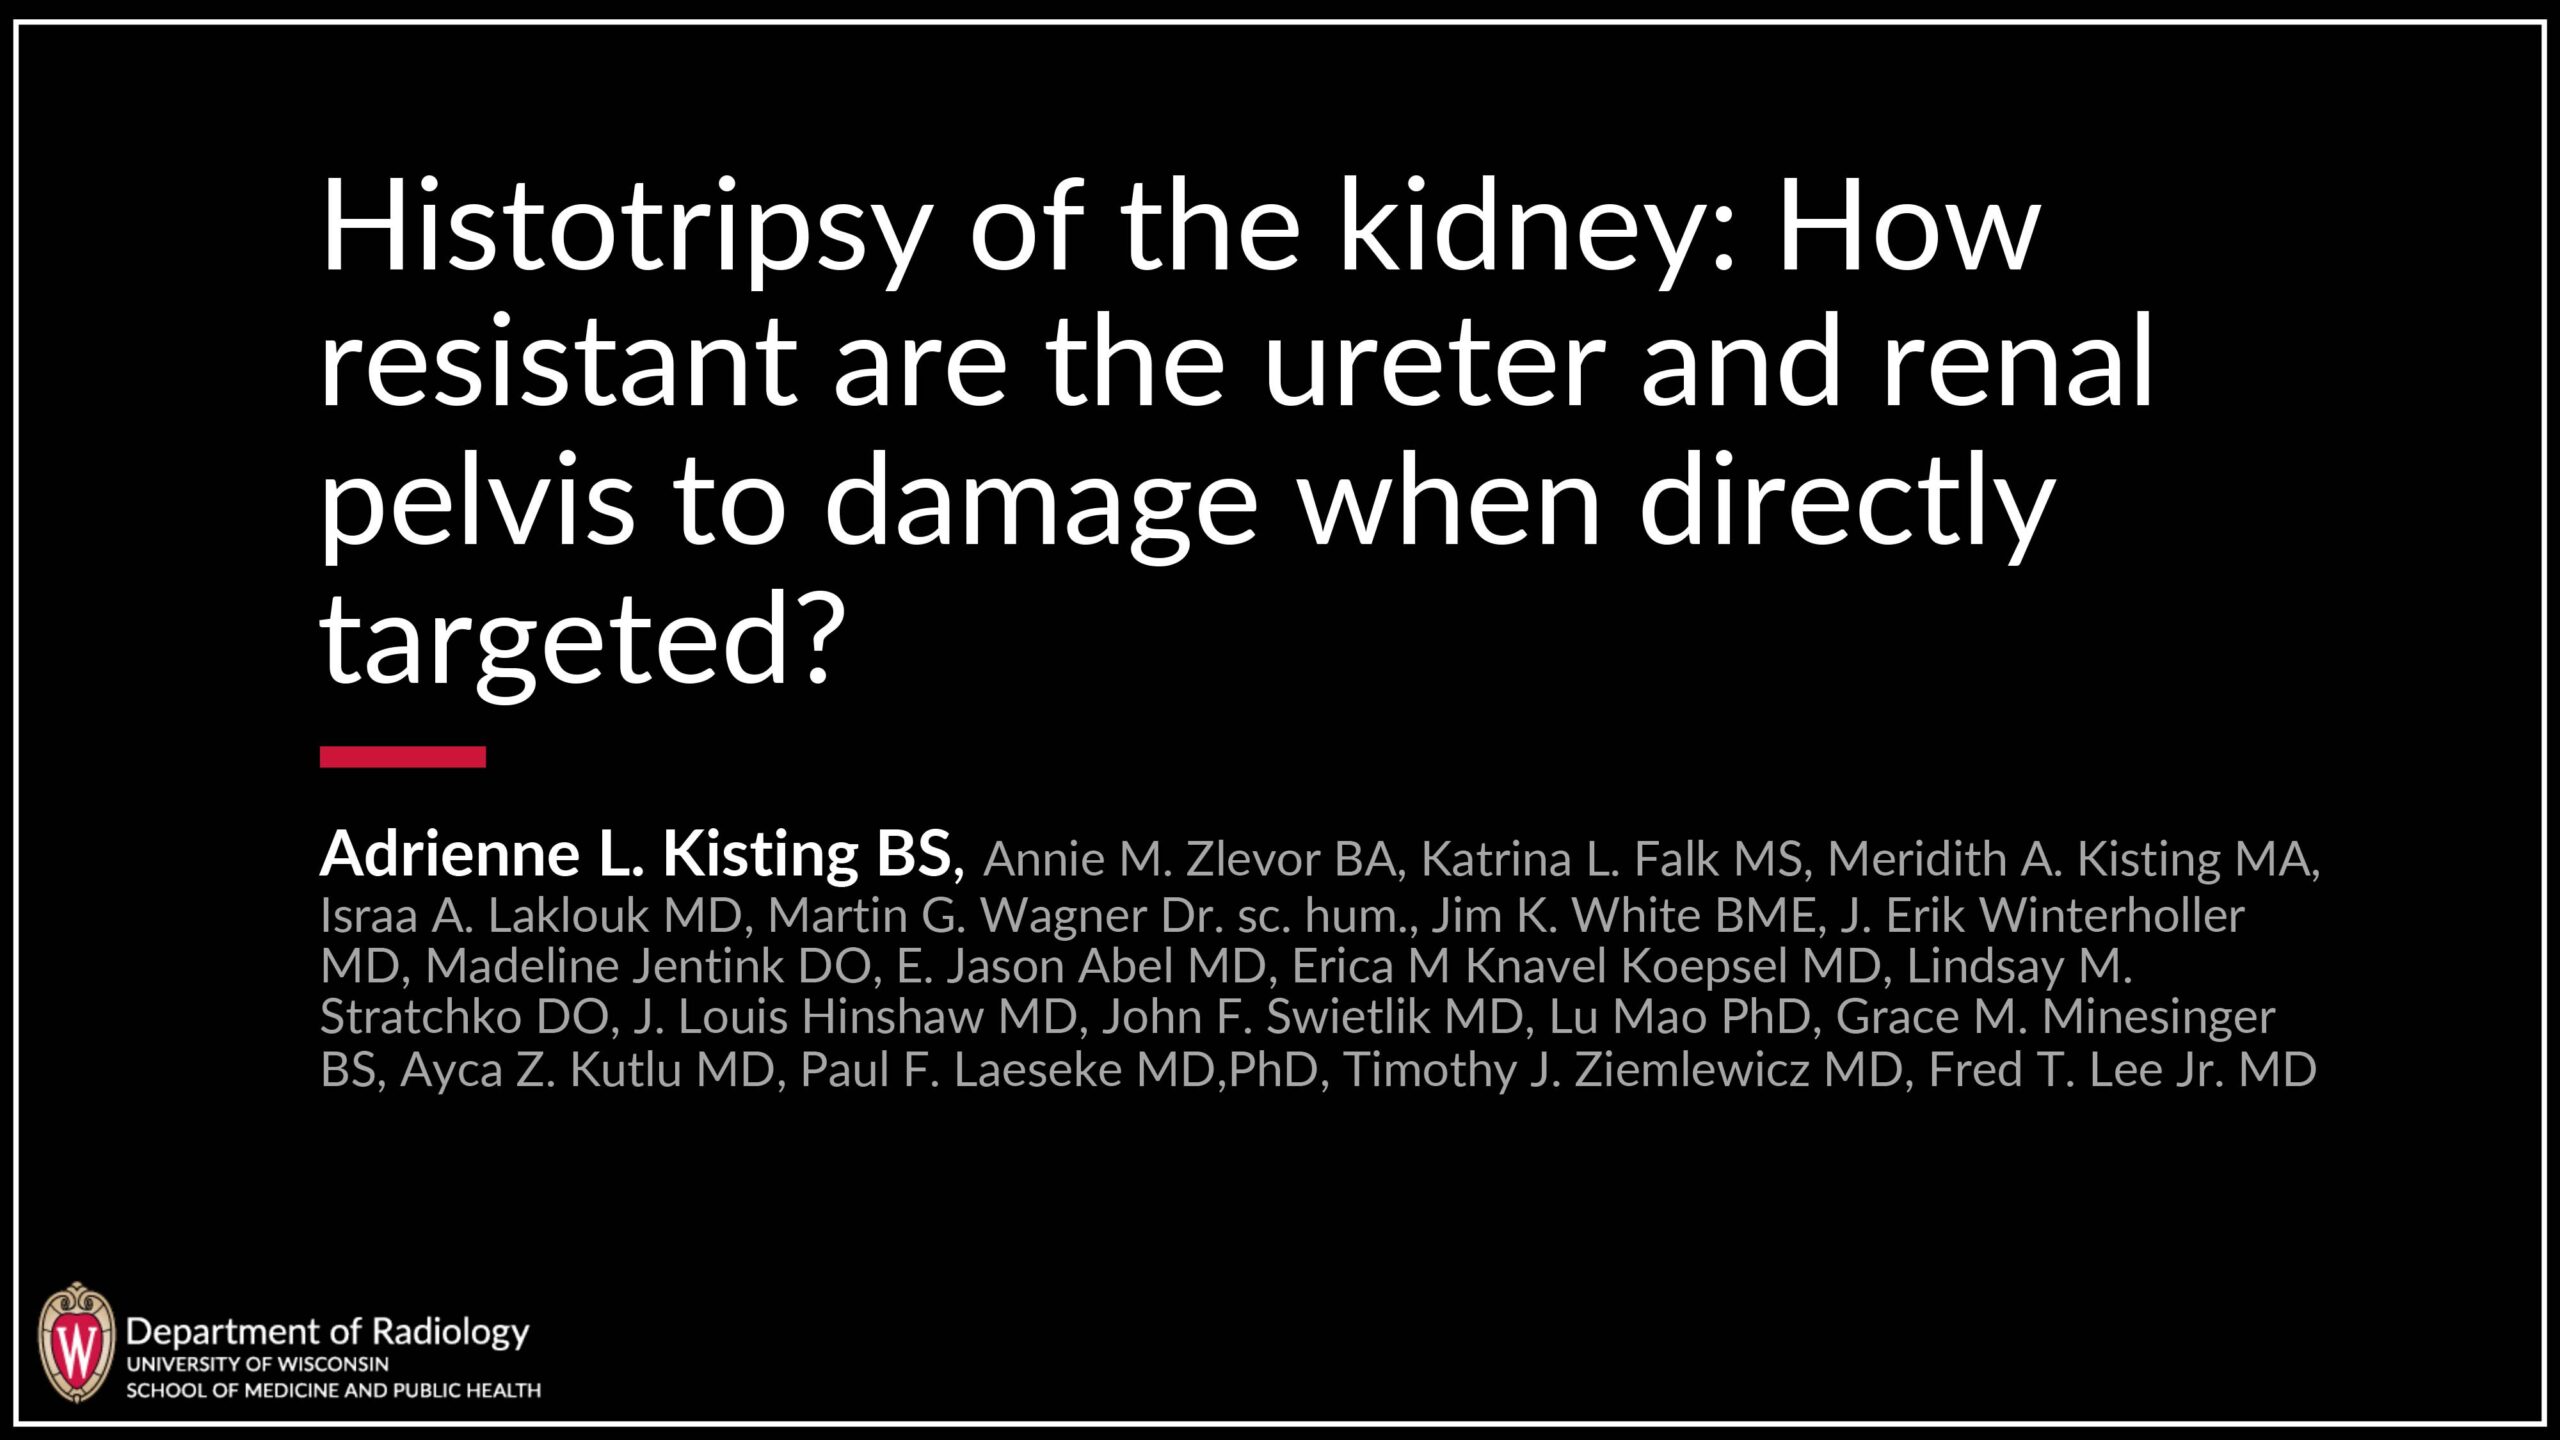 Histotripsy of the Kidney: How Resistant are the Ureter and Renal Pelvis to Damage when Directly Targeted?